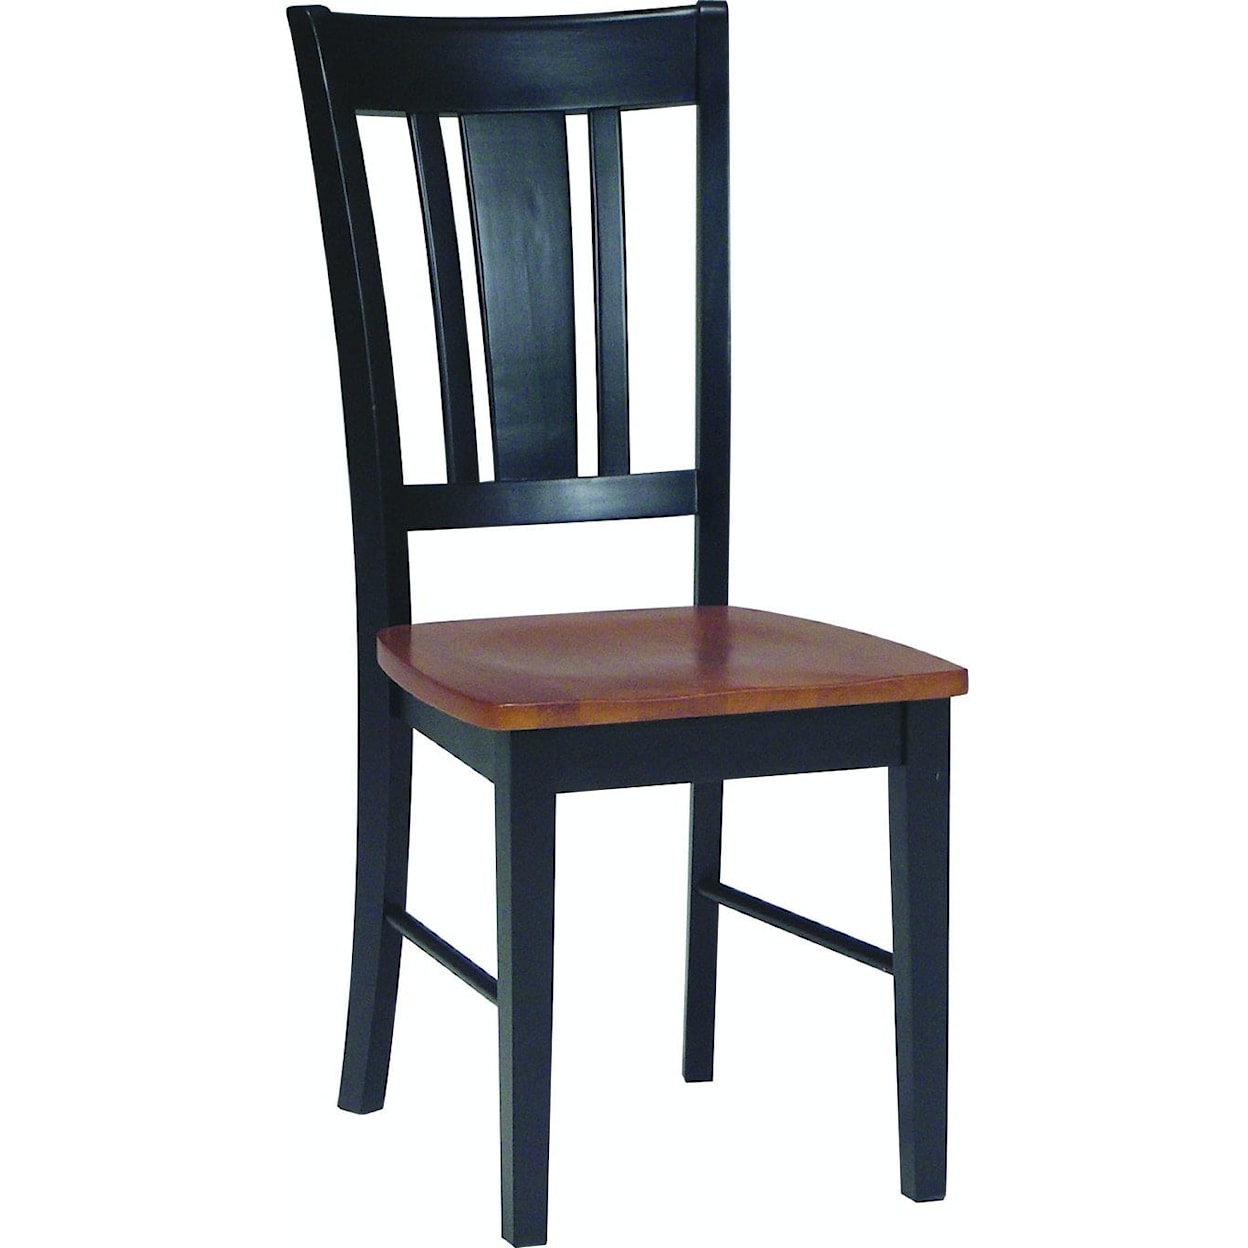 John Thomas Dining Essentials San Remo Dining Chair in Cherry / Black